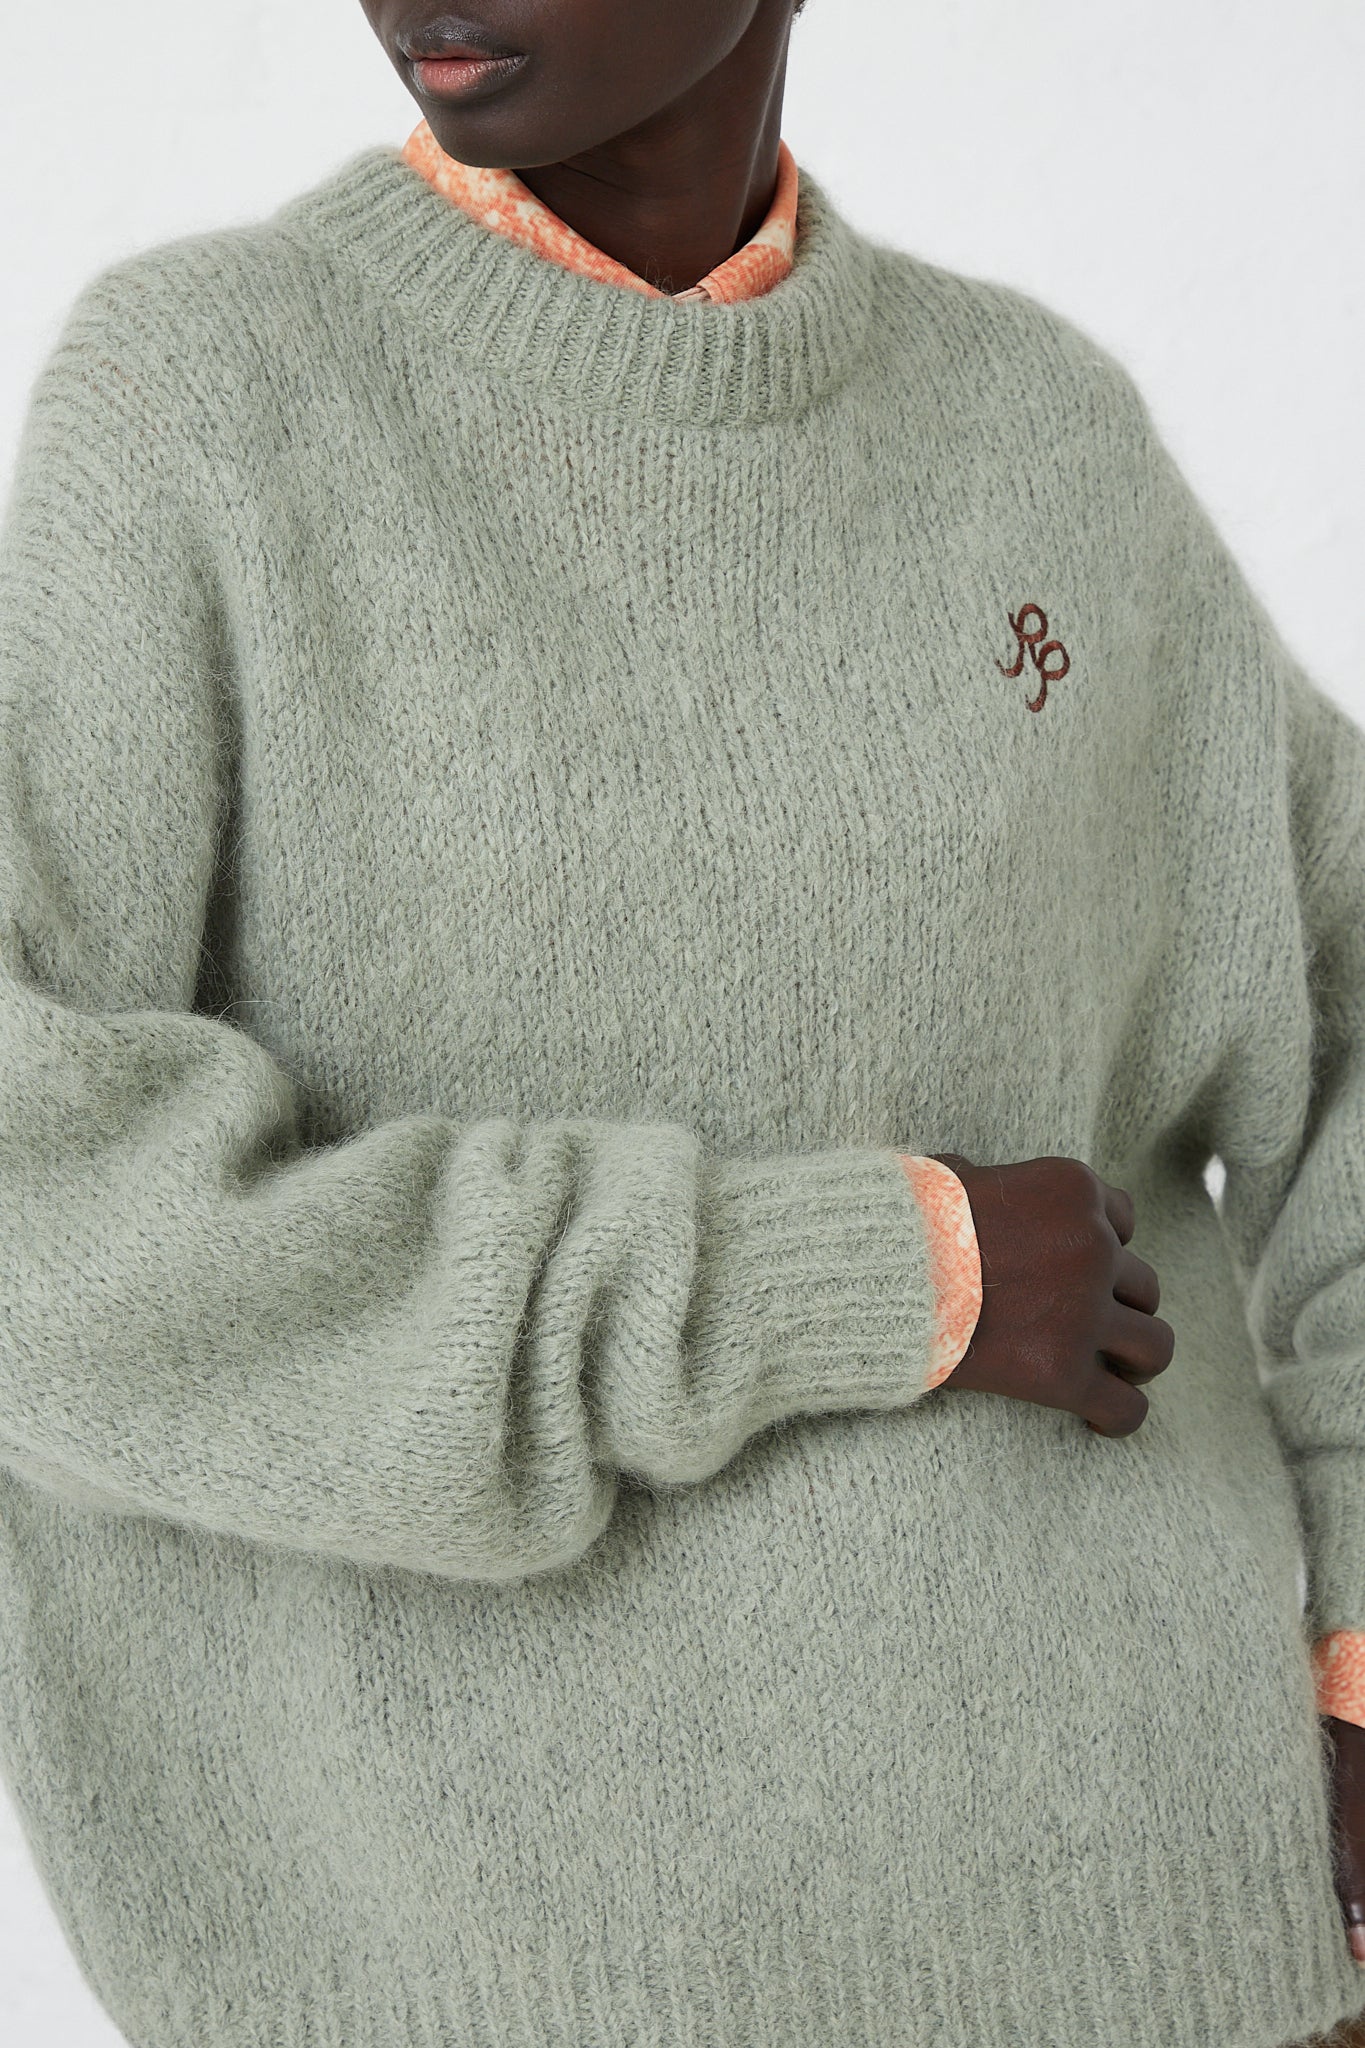 A woman wearing a crew neck Alpaca Blend Toni Sweater in Mint by Rejina Pyo, with an embroidered logo detail.